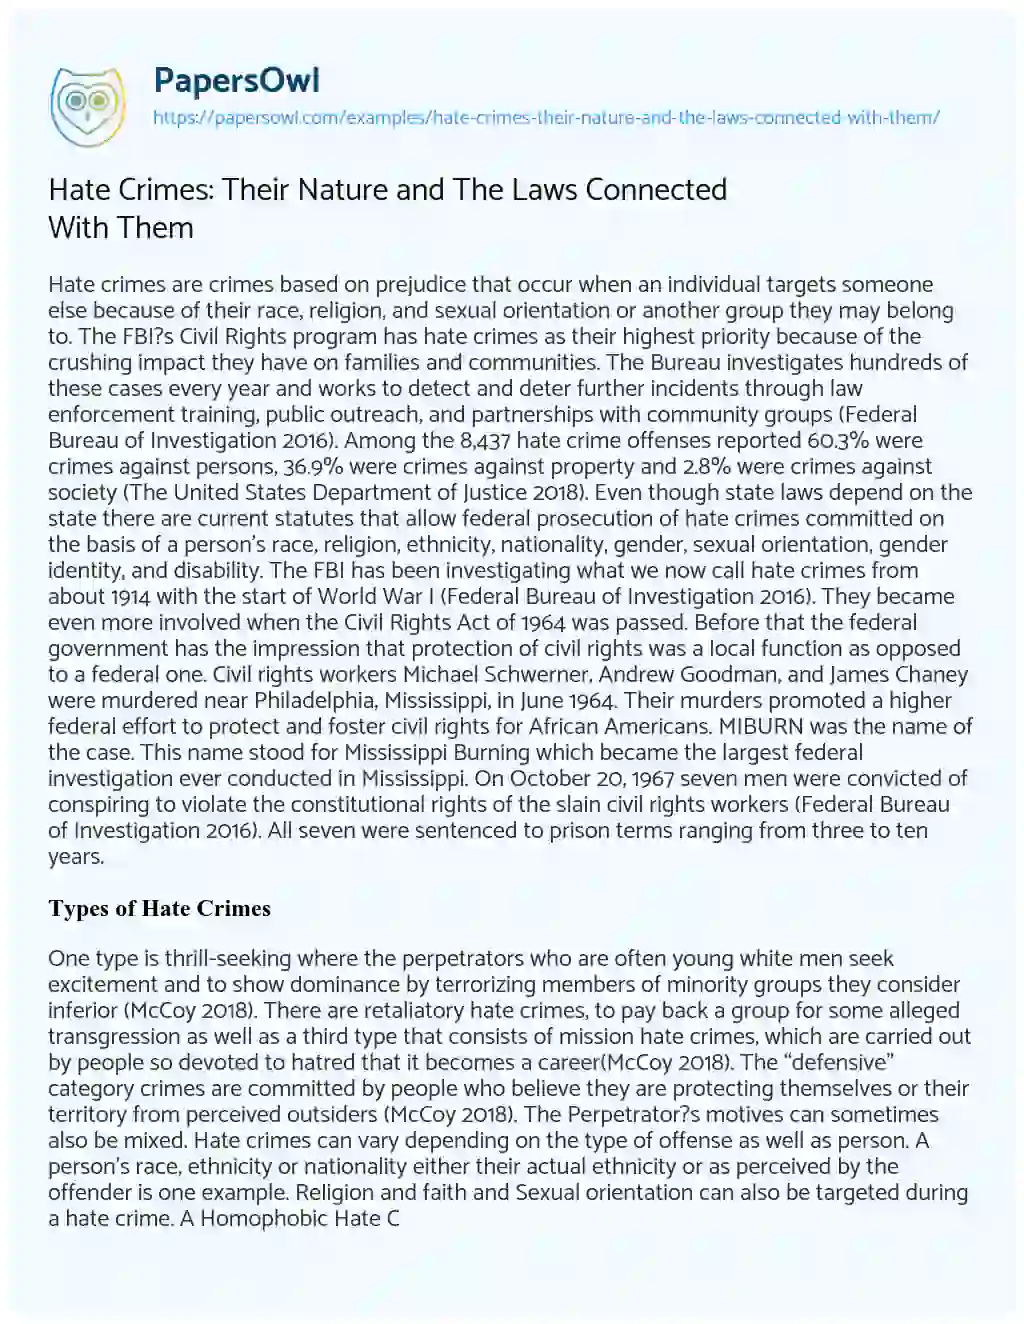 Essay on Hate Crimes: their Nature and the Laws Connected with them